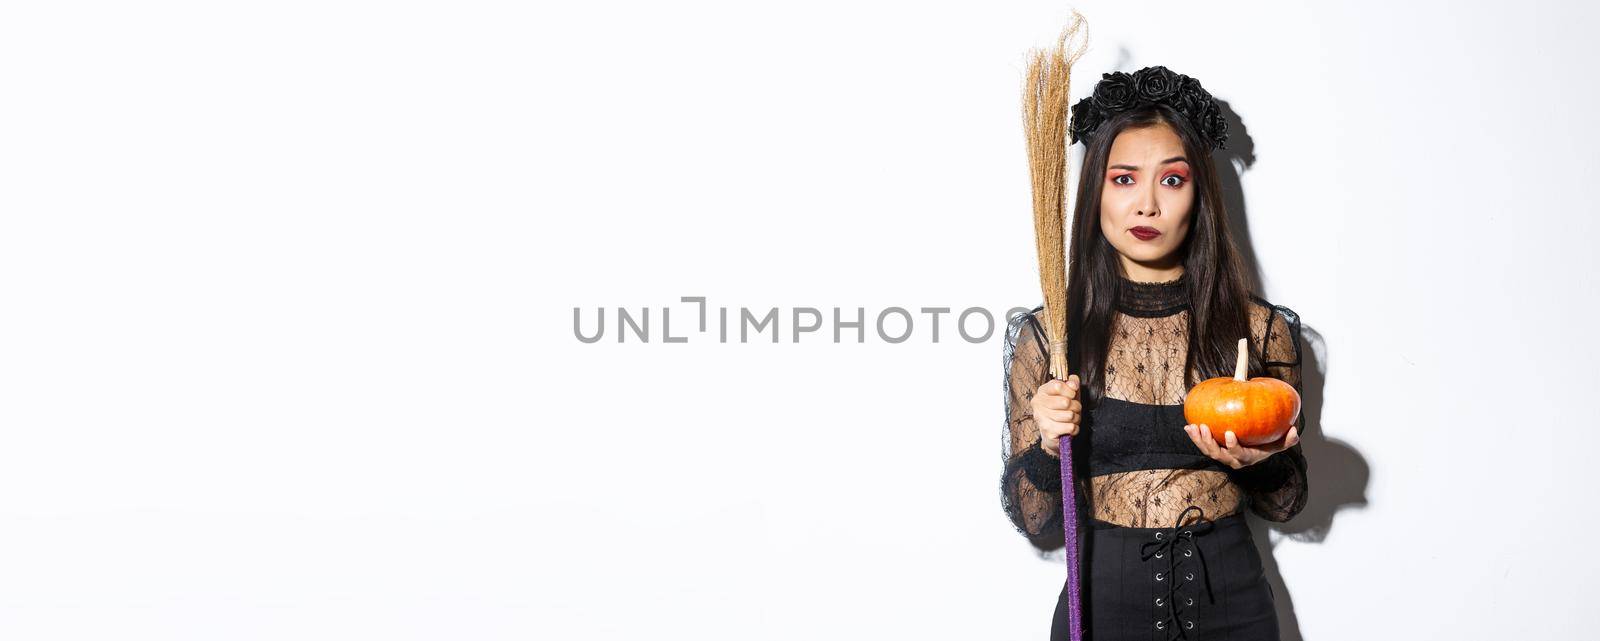 Worried and confused asian woman in witch costume looking nervous, holding broom and pumpkin, trick or treating on halloween, standing over white background.